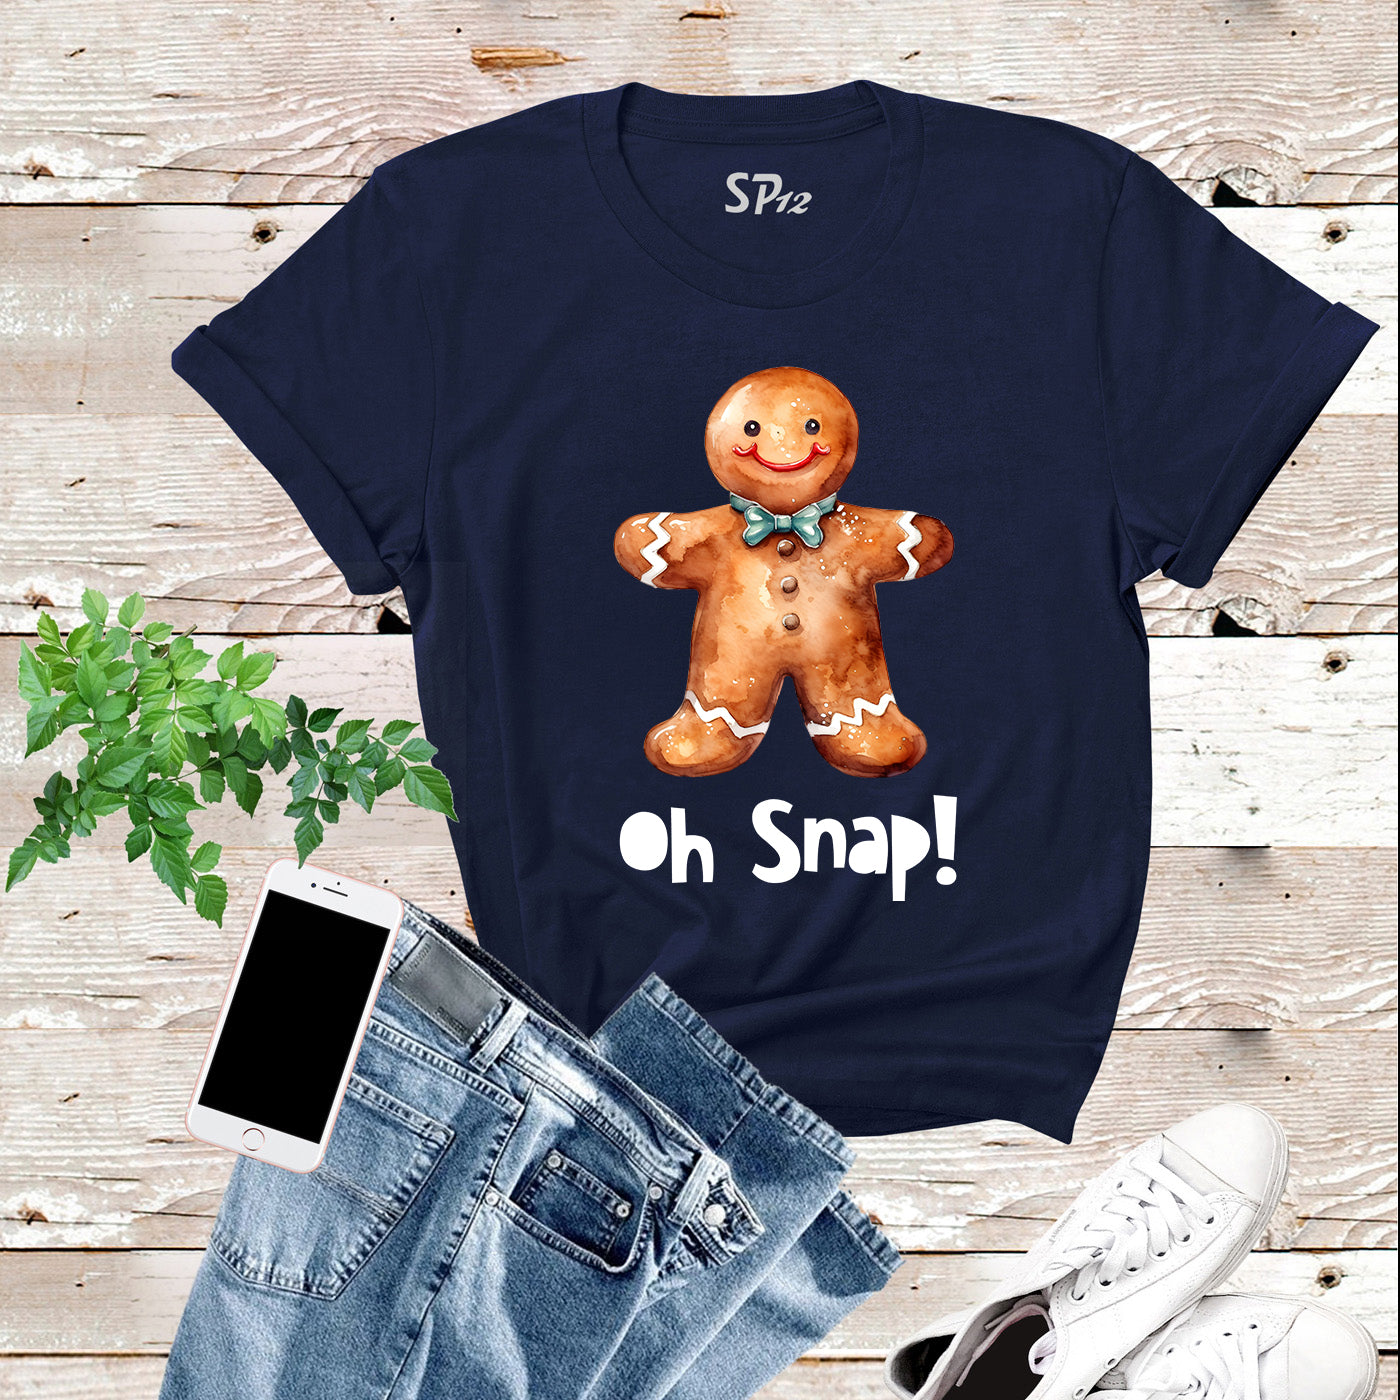 Oh Snap Gingerbread T Shirt